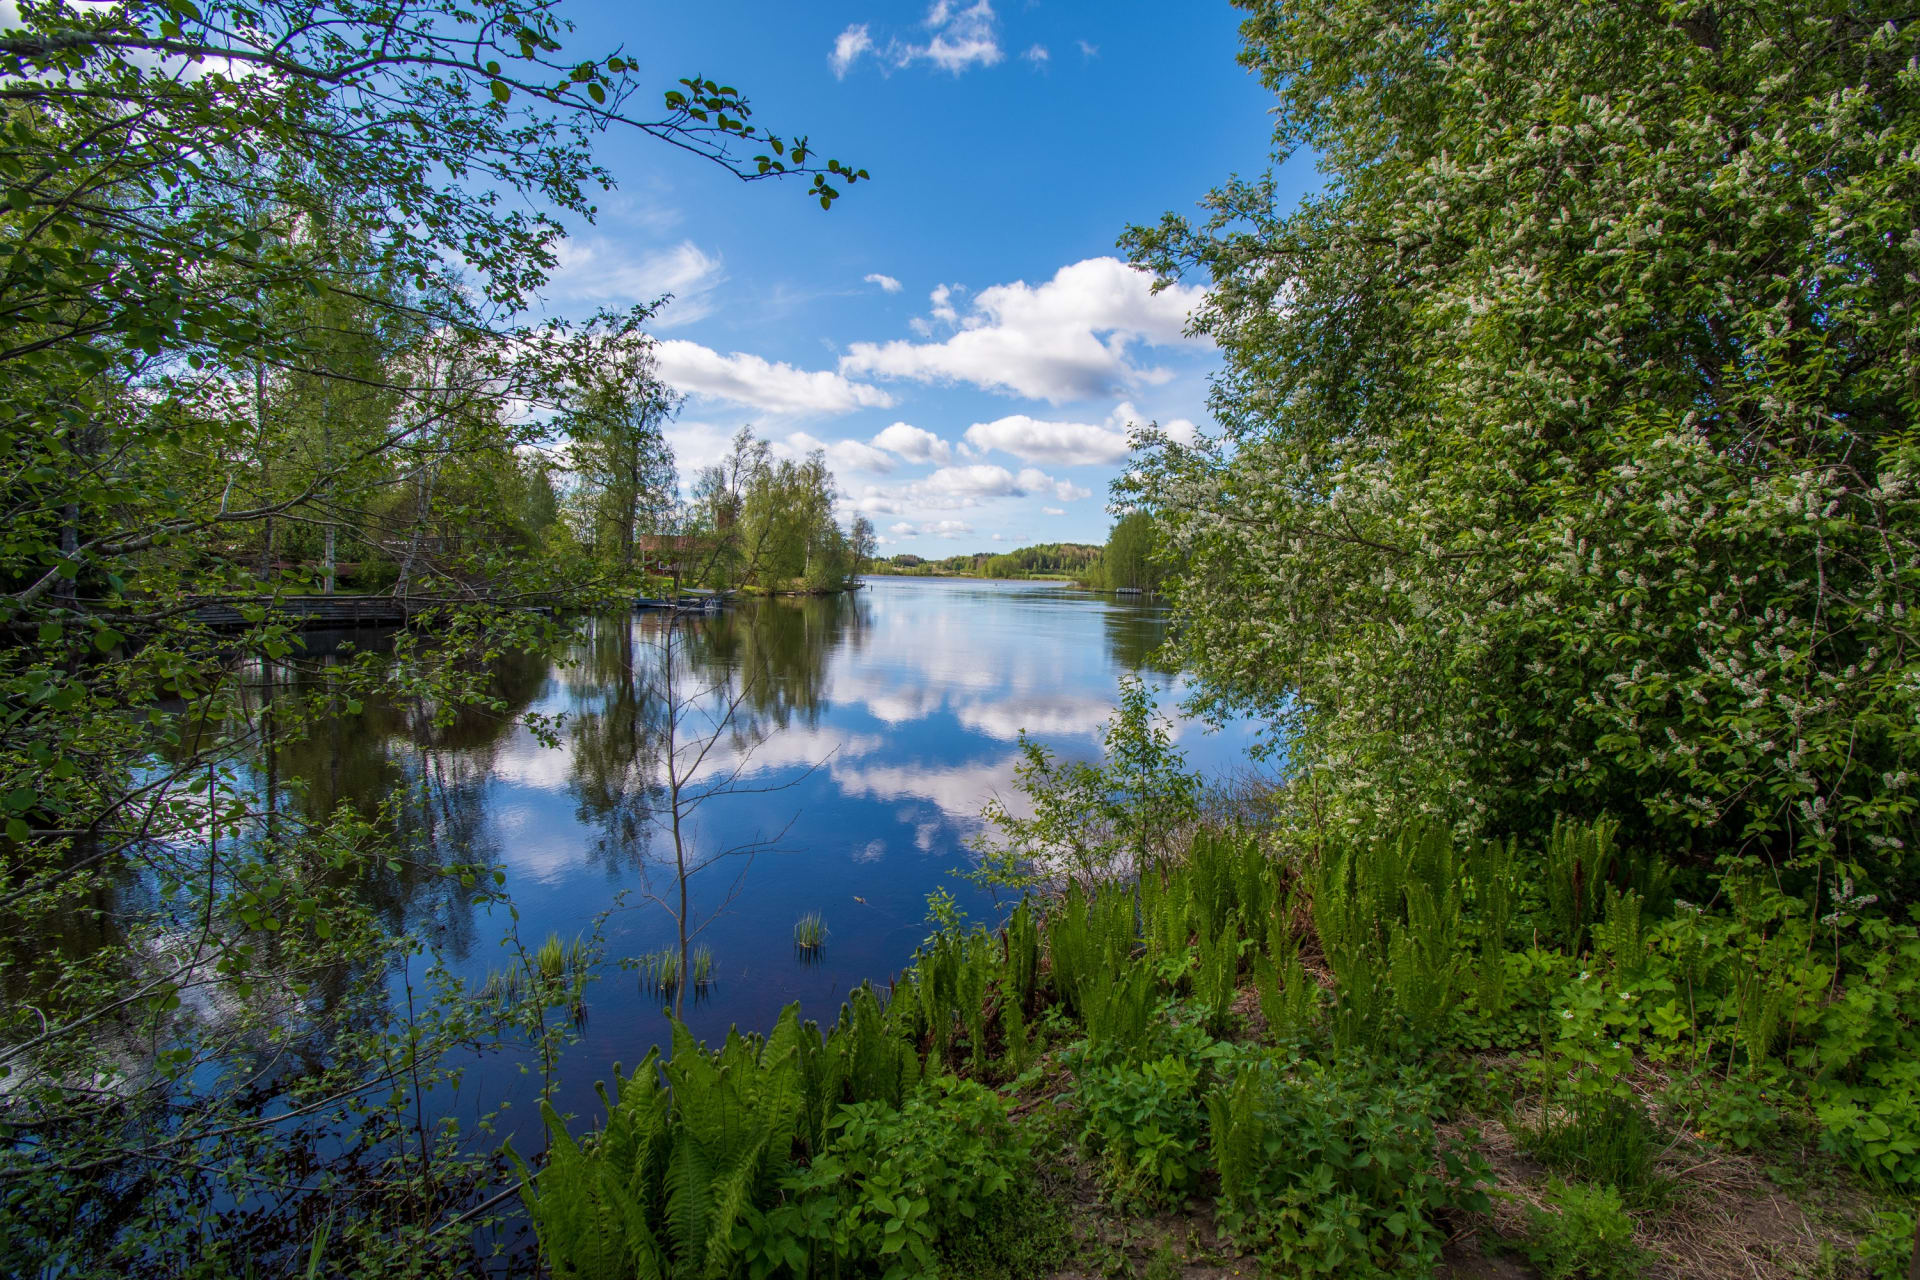 Located on the banks of the Pappilanjoki river